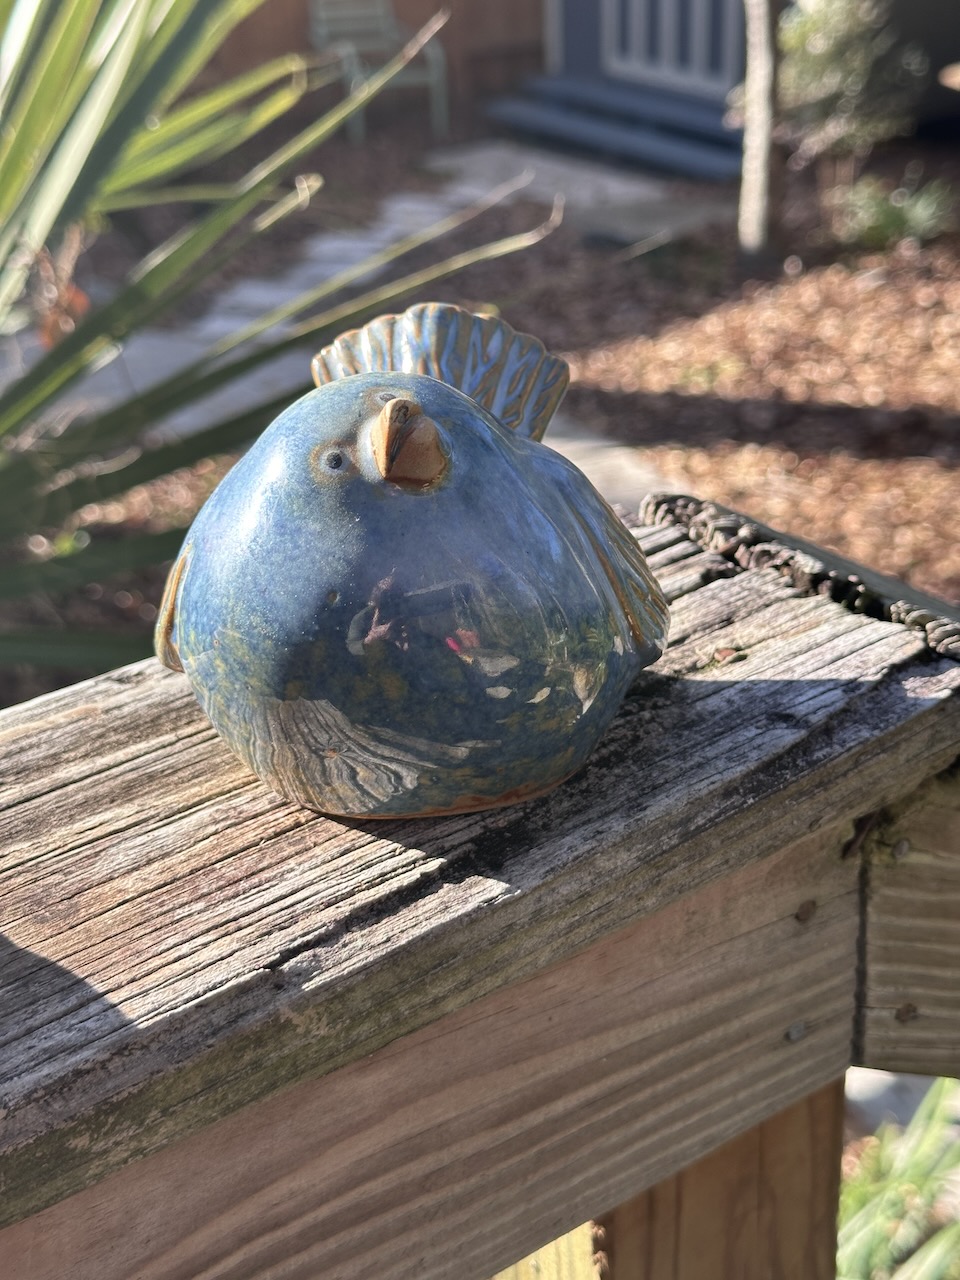 Ceramic fat bluebird with patina of gold mostly on wings and tail. Beak is slightly ajar and pointed upward as if in greeting.